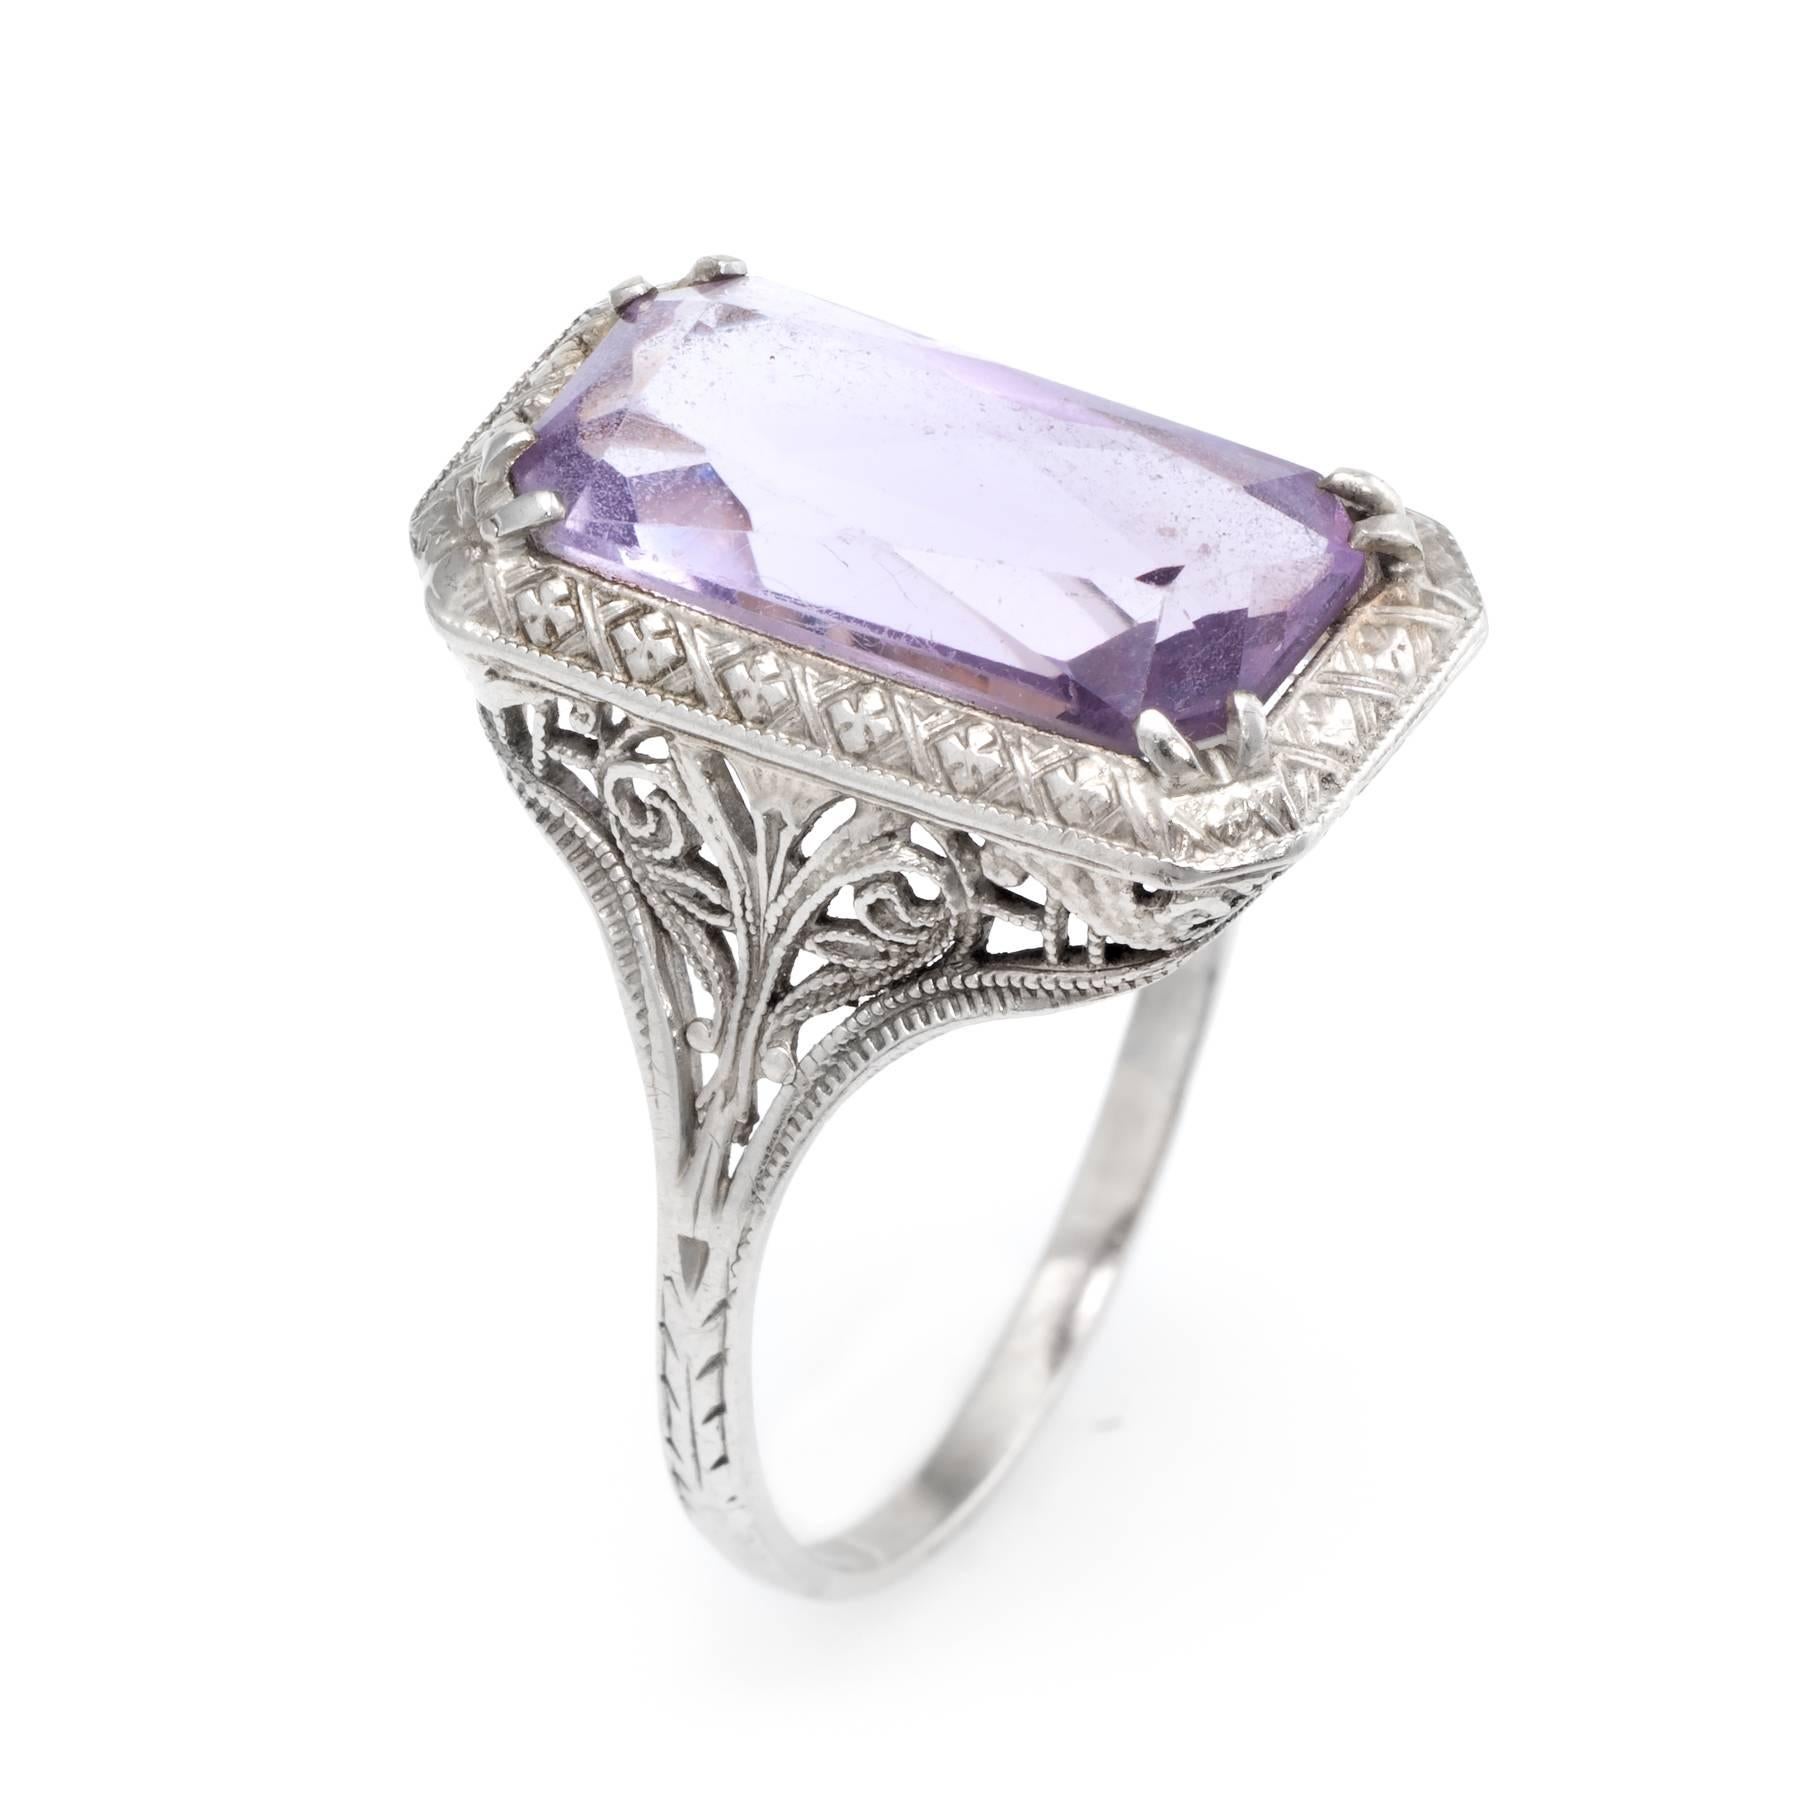 Elegant Art Deco era ring (circa 1920s to 1930s), crafted in 14 karat white gold. 

Faceted rectangular cut amethyst measures 16mm x 8mm (estimated at 5.50 carats). Few light surface abrasions to the amethyst (visible under a 10x loupe). 

Lacy